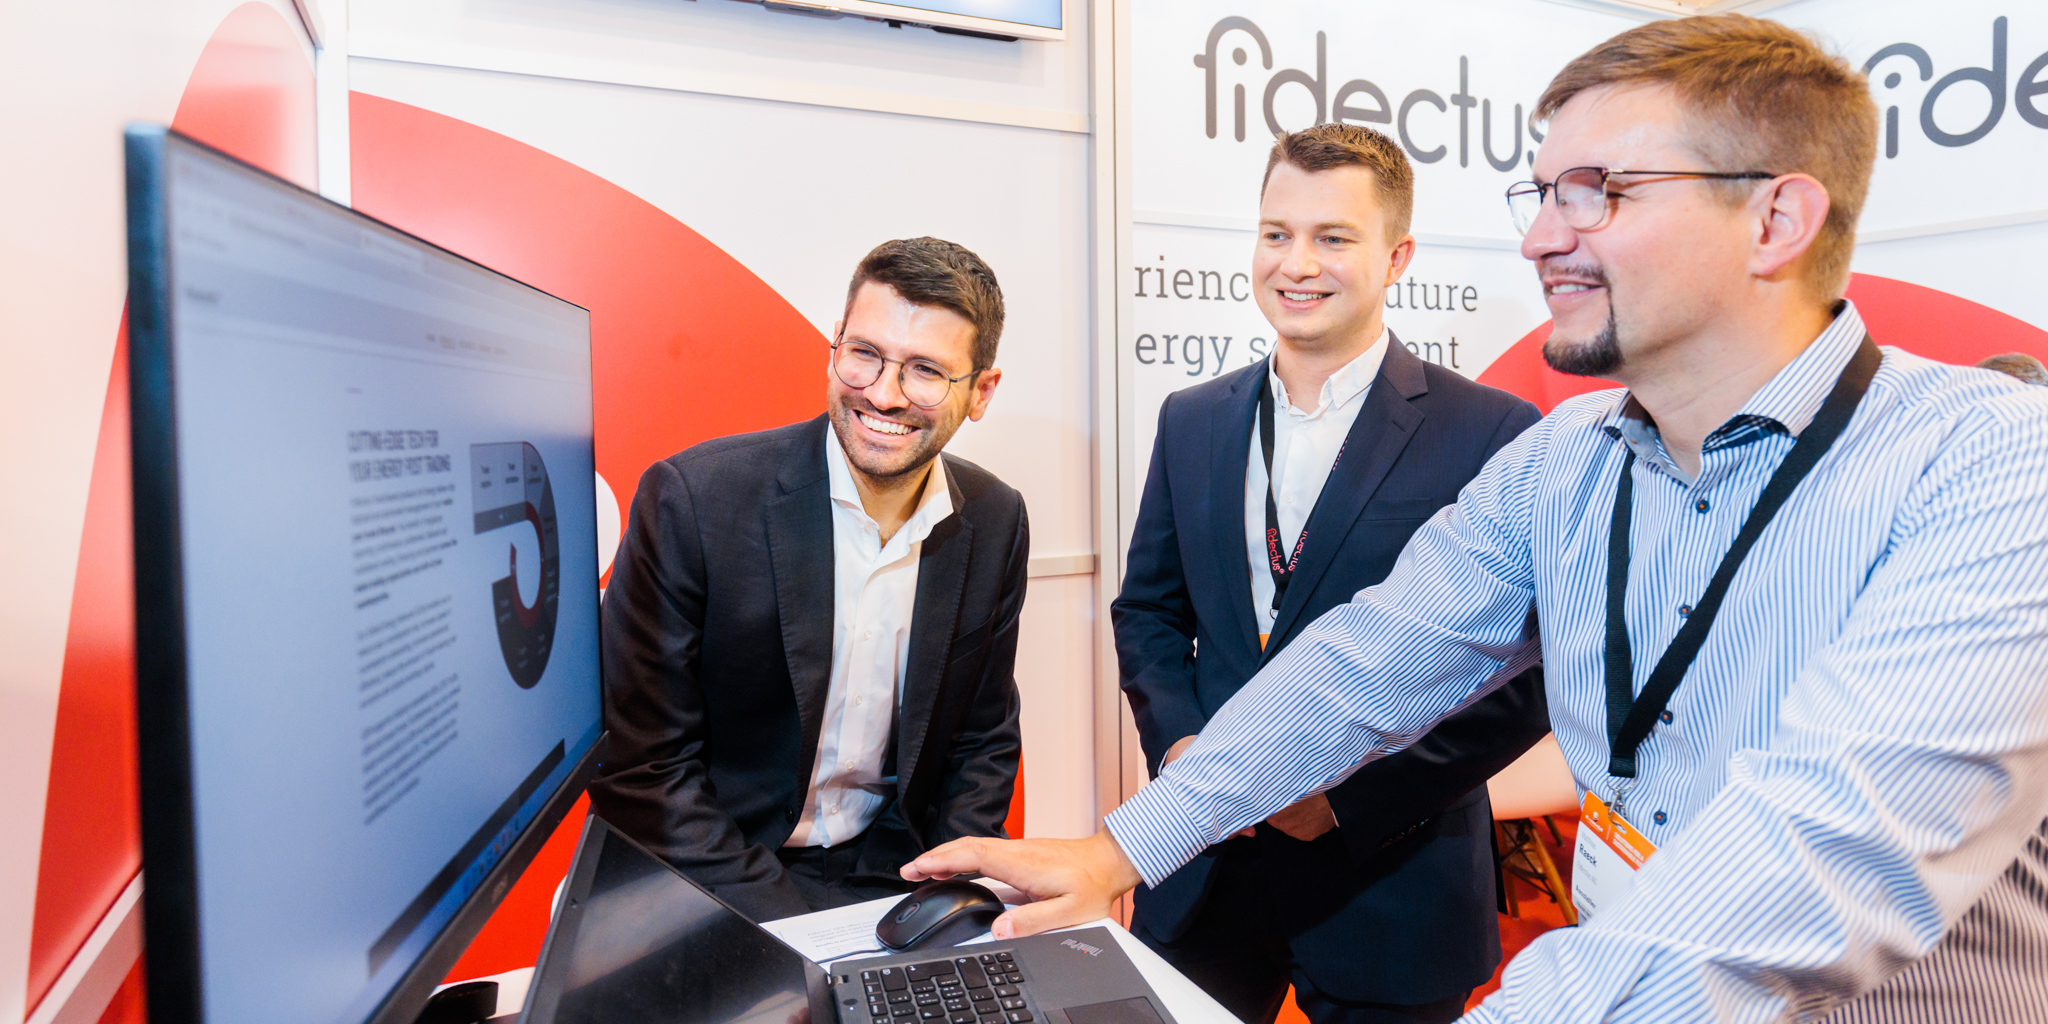 Fidectus booth at E-world 2022